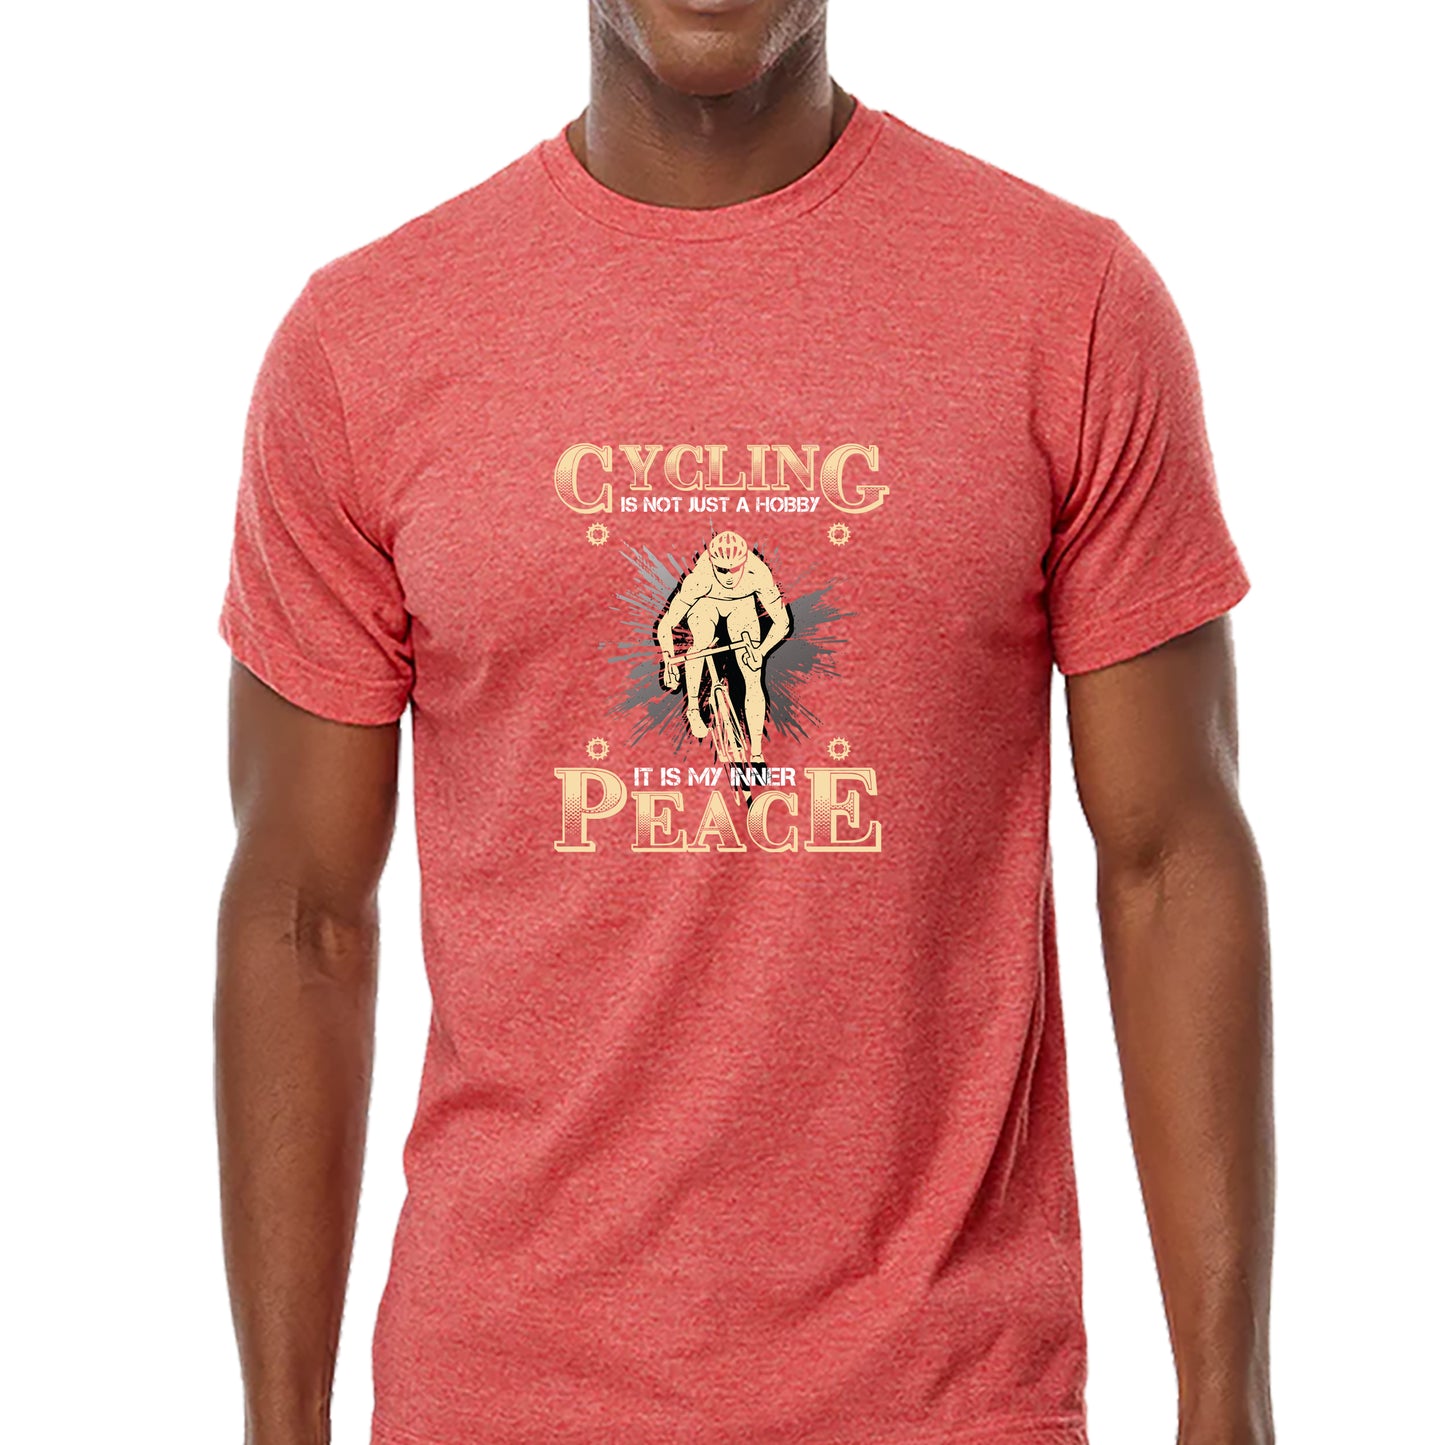 Cycling is Peace T-shirt